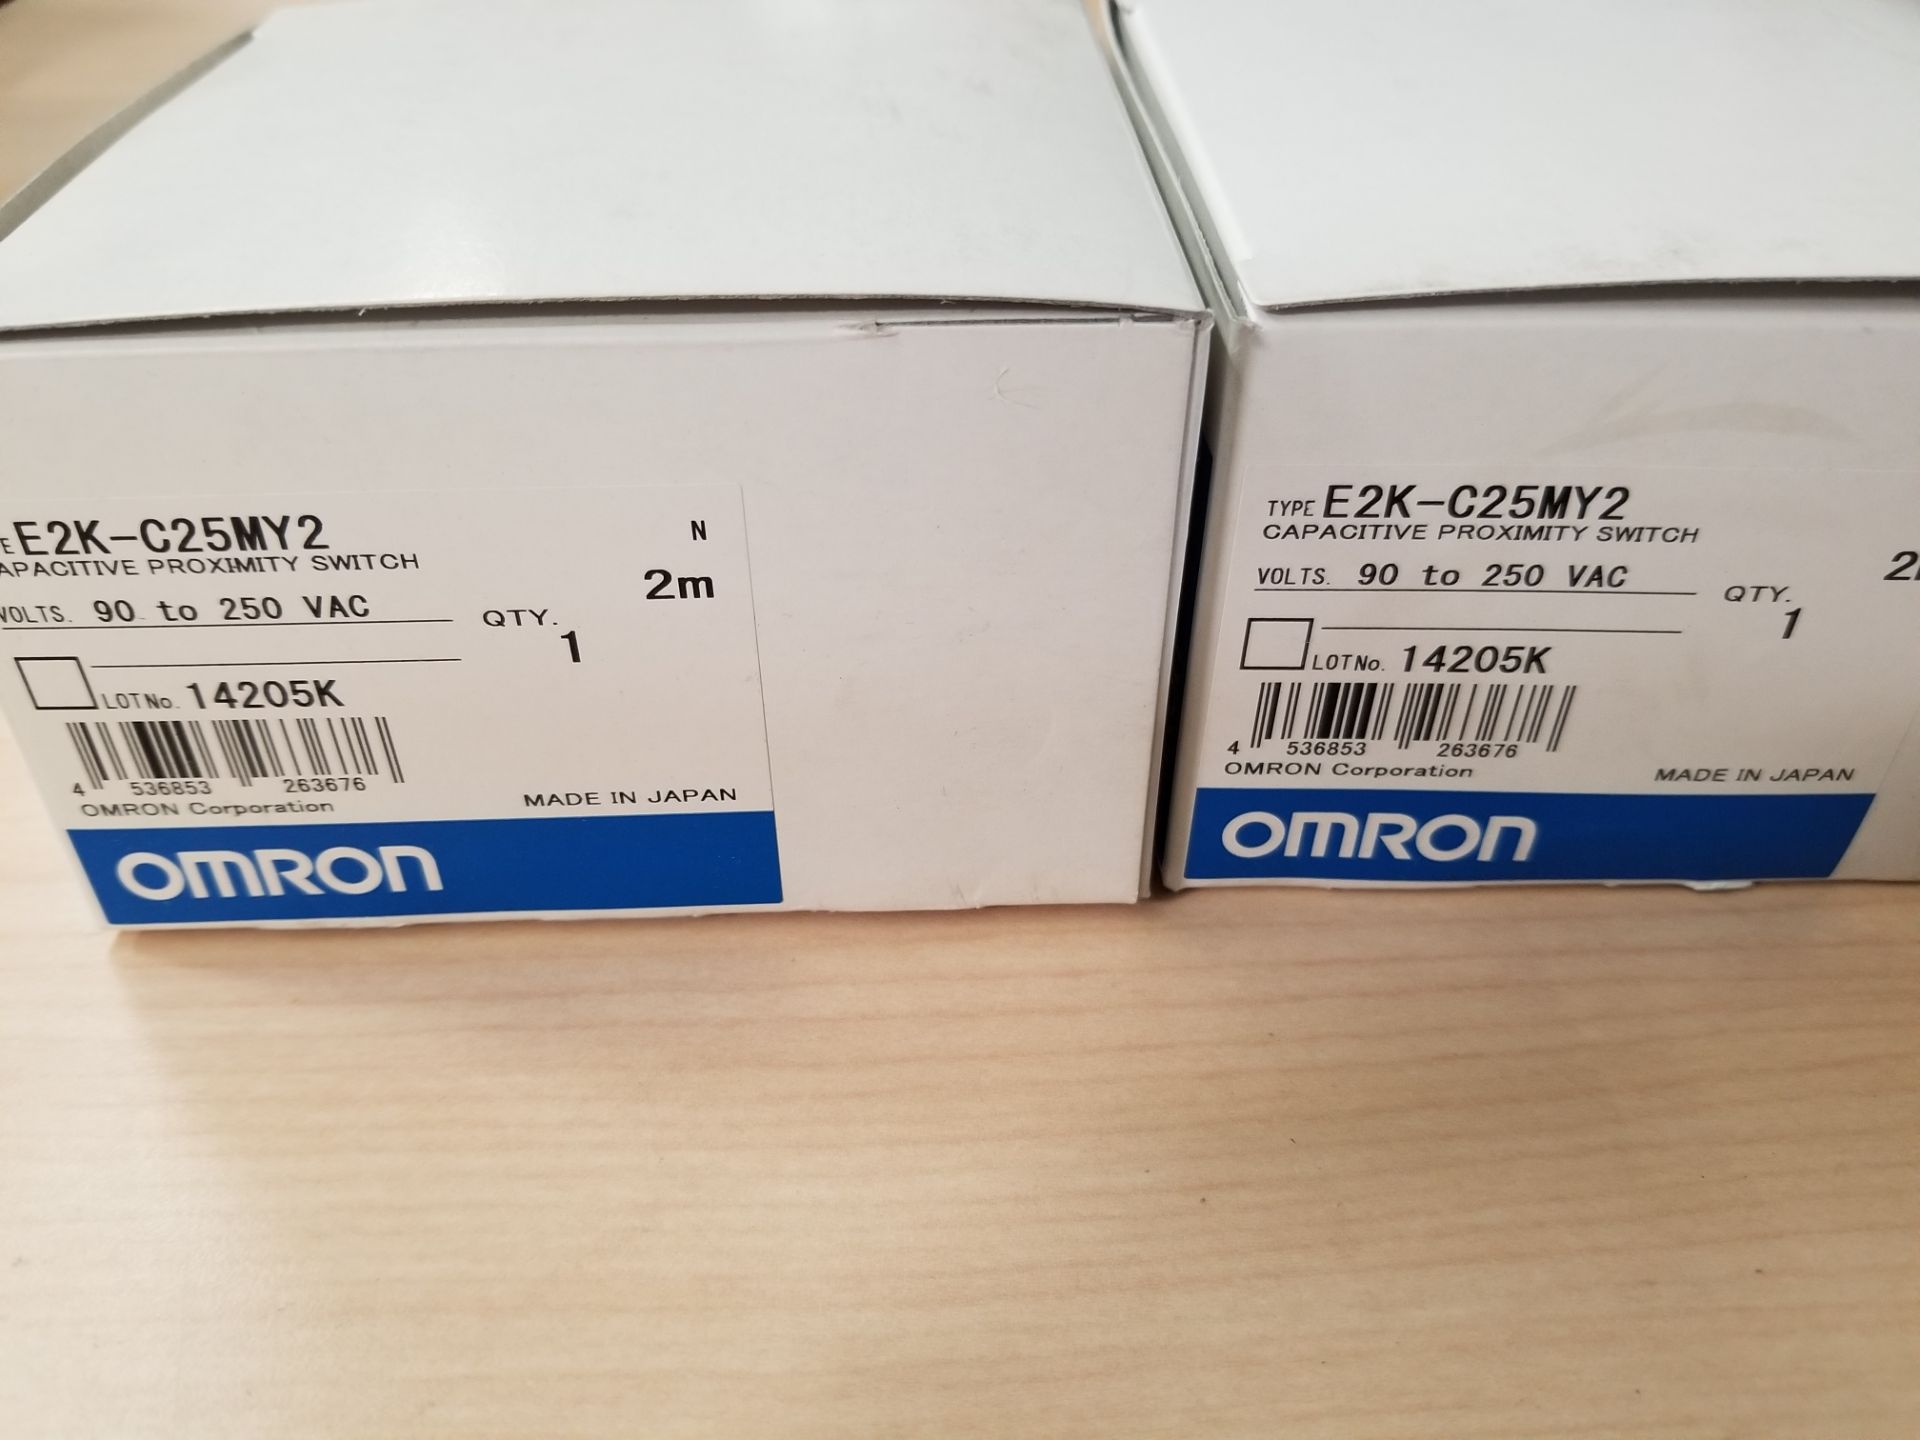 LOT OF 2 NEW OMRON E2K-C25MY2 CAPACITIVE PROXIMITY SWITCHES/SENSORS - Image 2 of 3